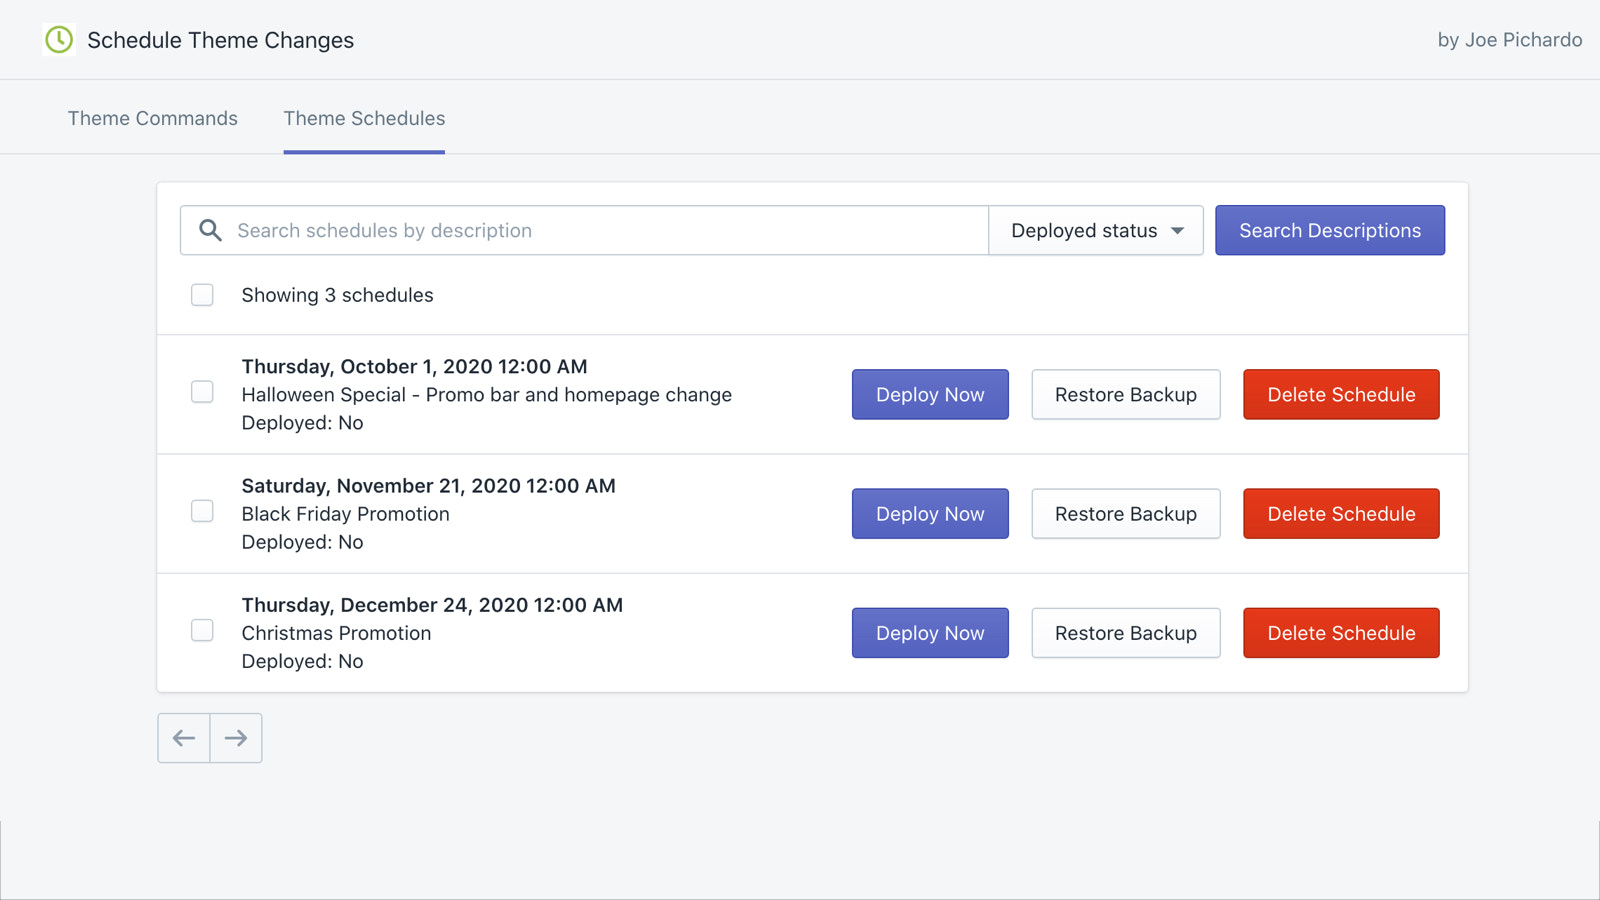 Manage scheduled changes. Restore backup, delete, or deploy now.